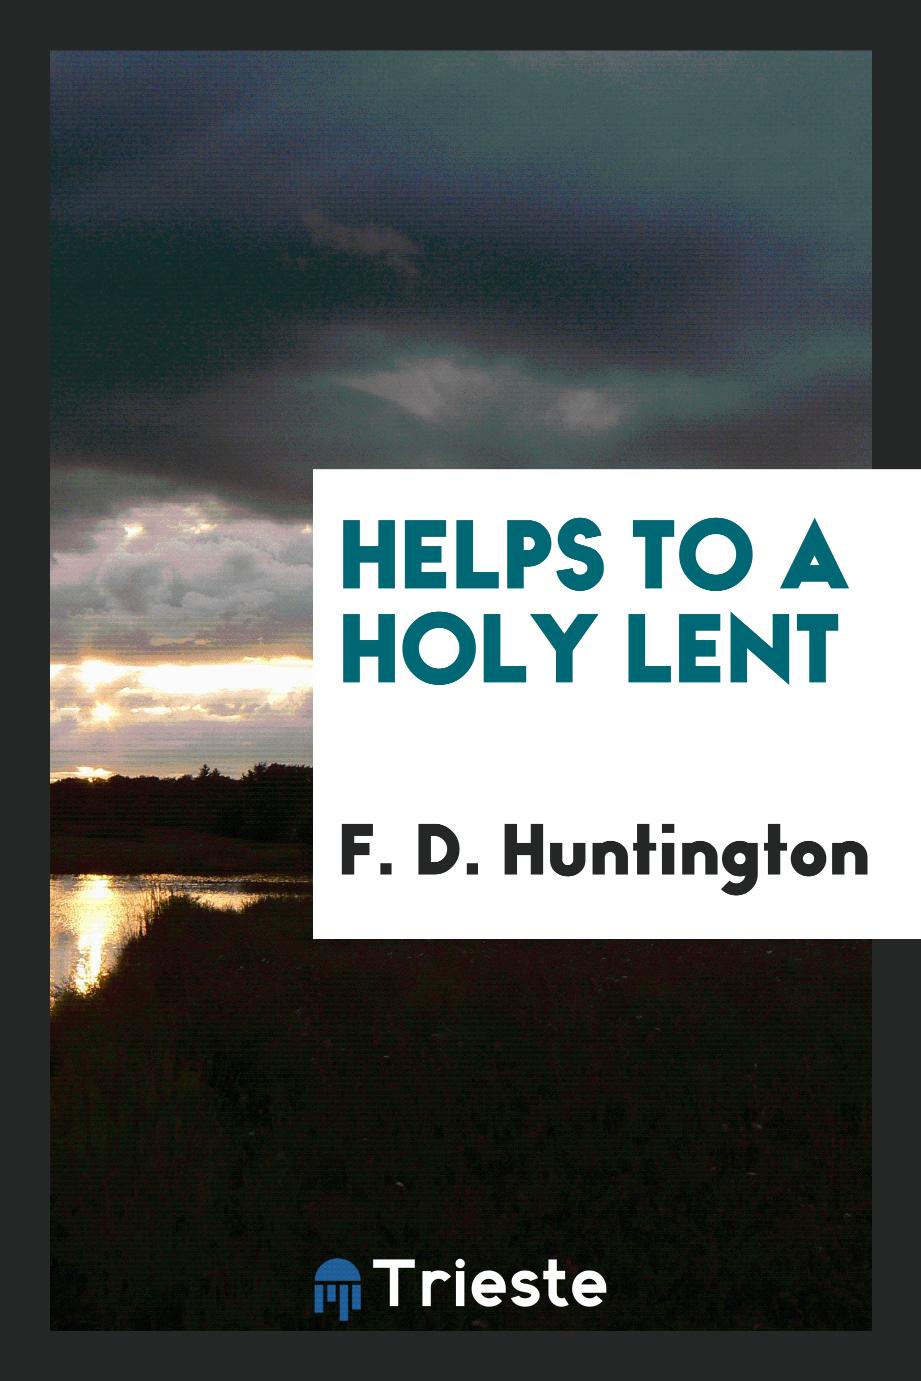 Helps to a holy Lent